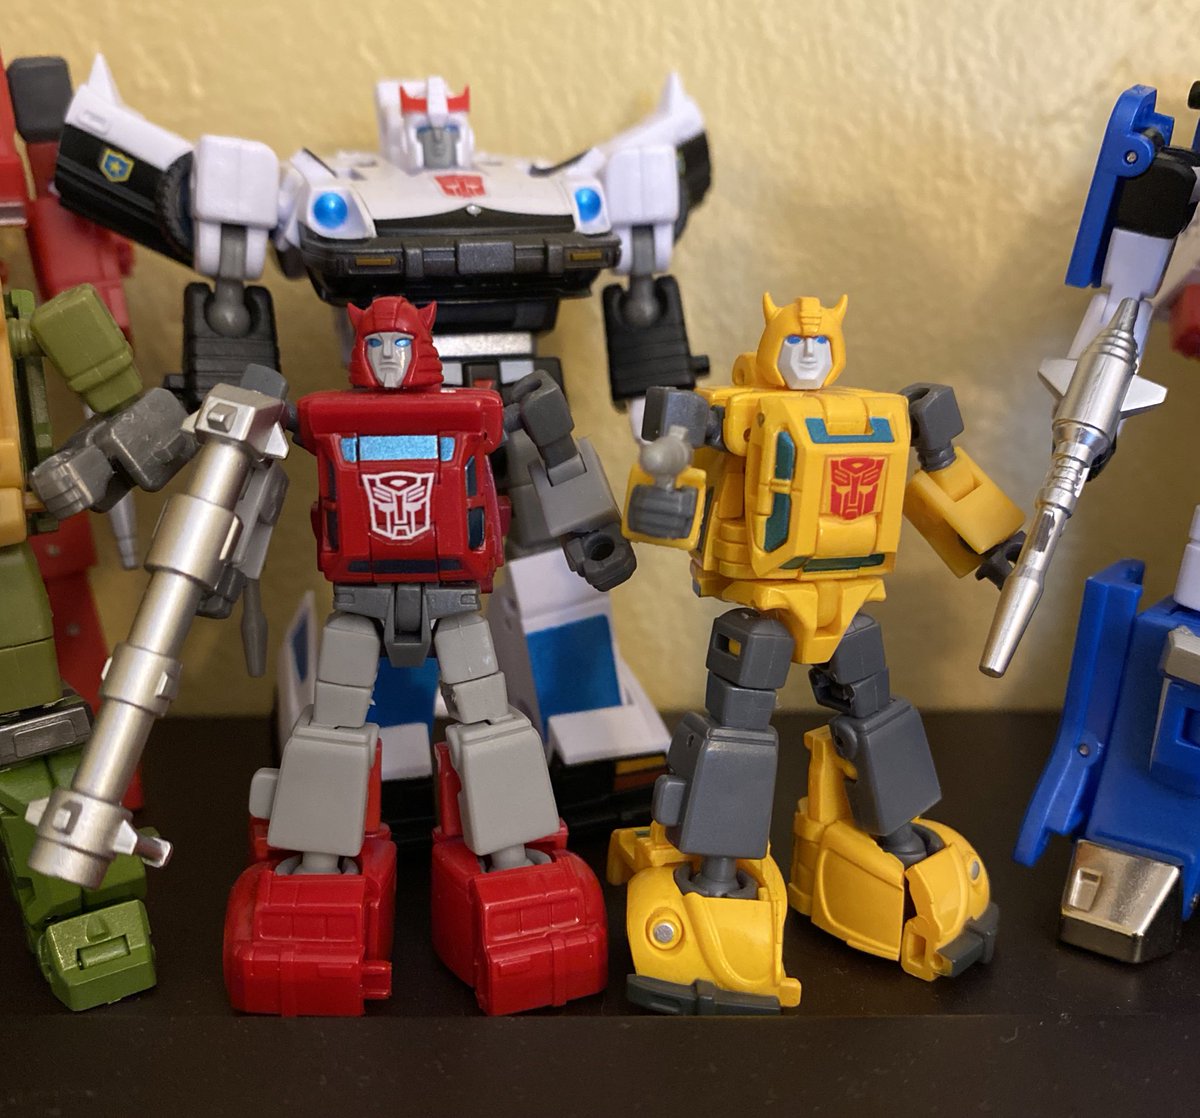 A couple minibros, and Prowl for good measure.
#cliffjumper  #bumblebee #newage